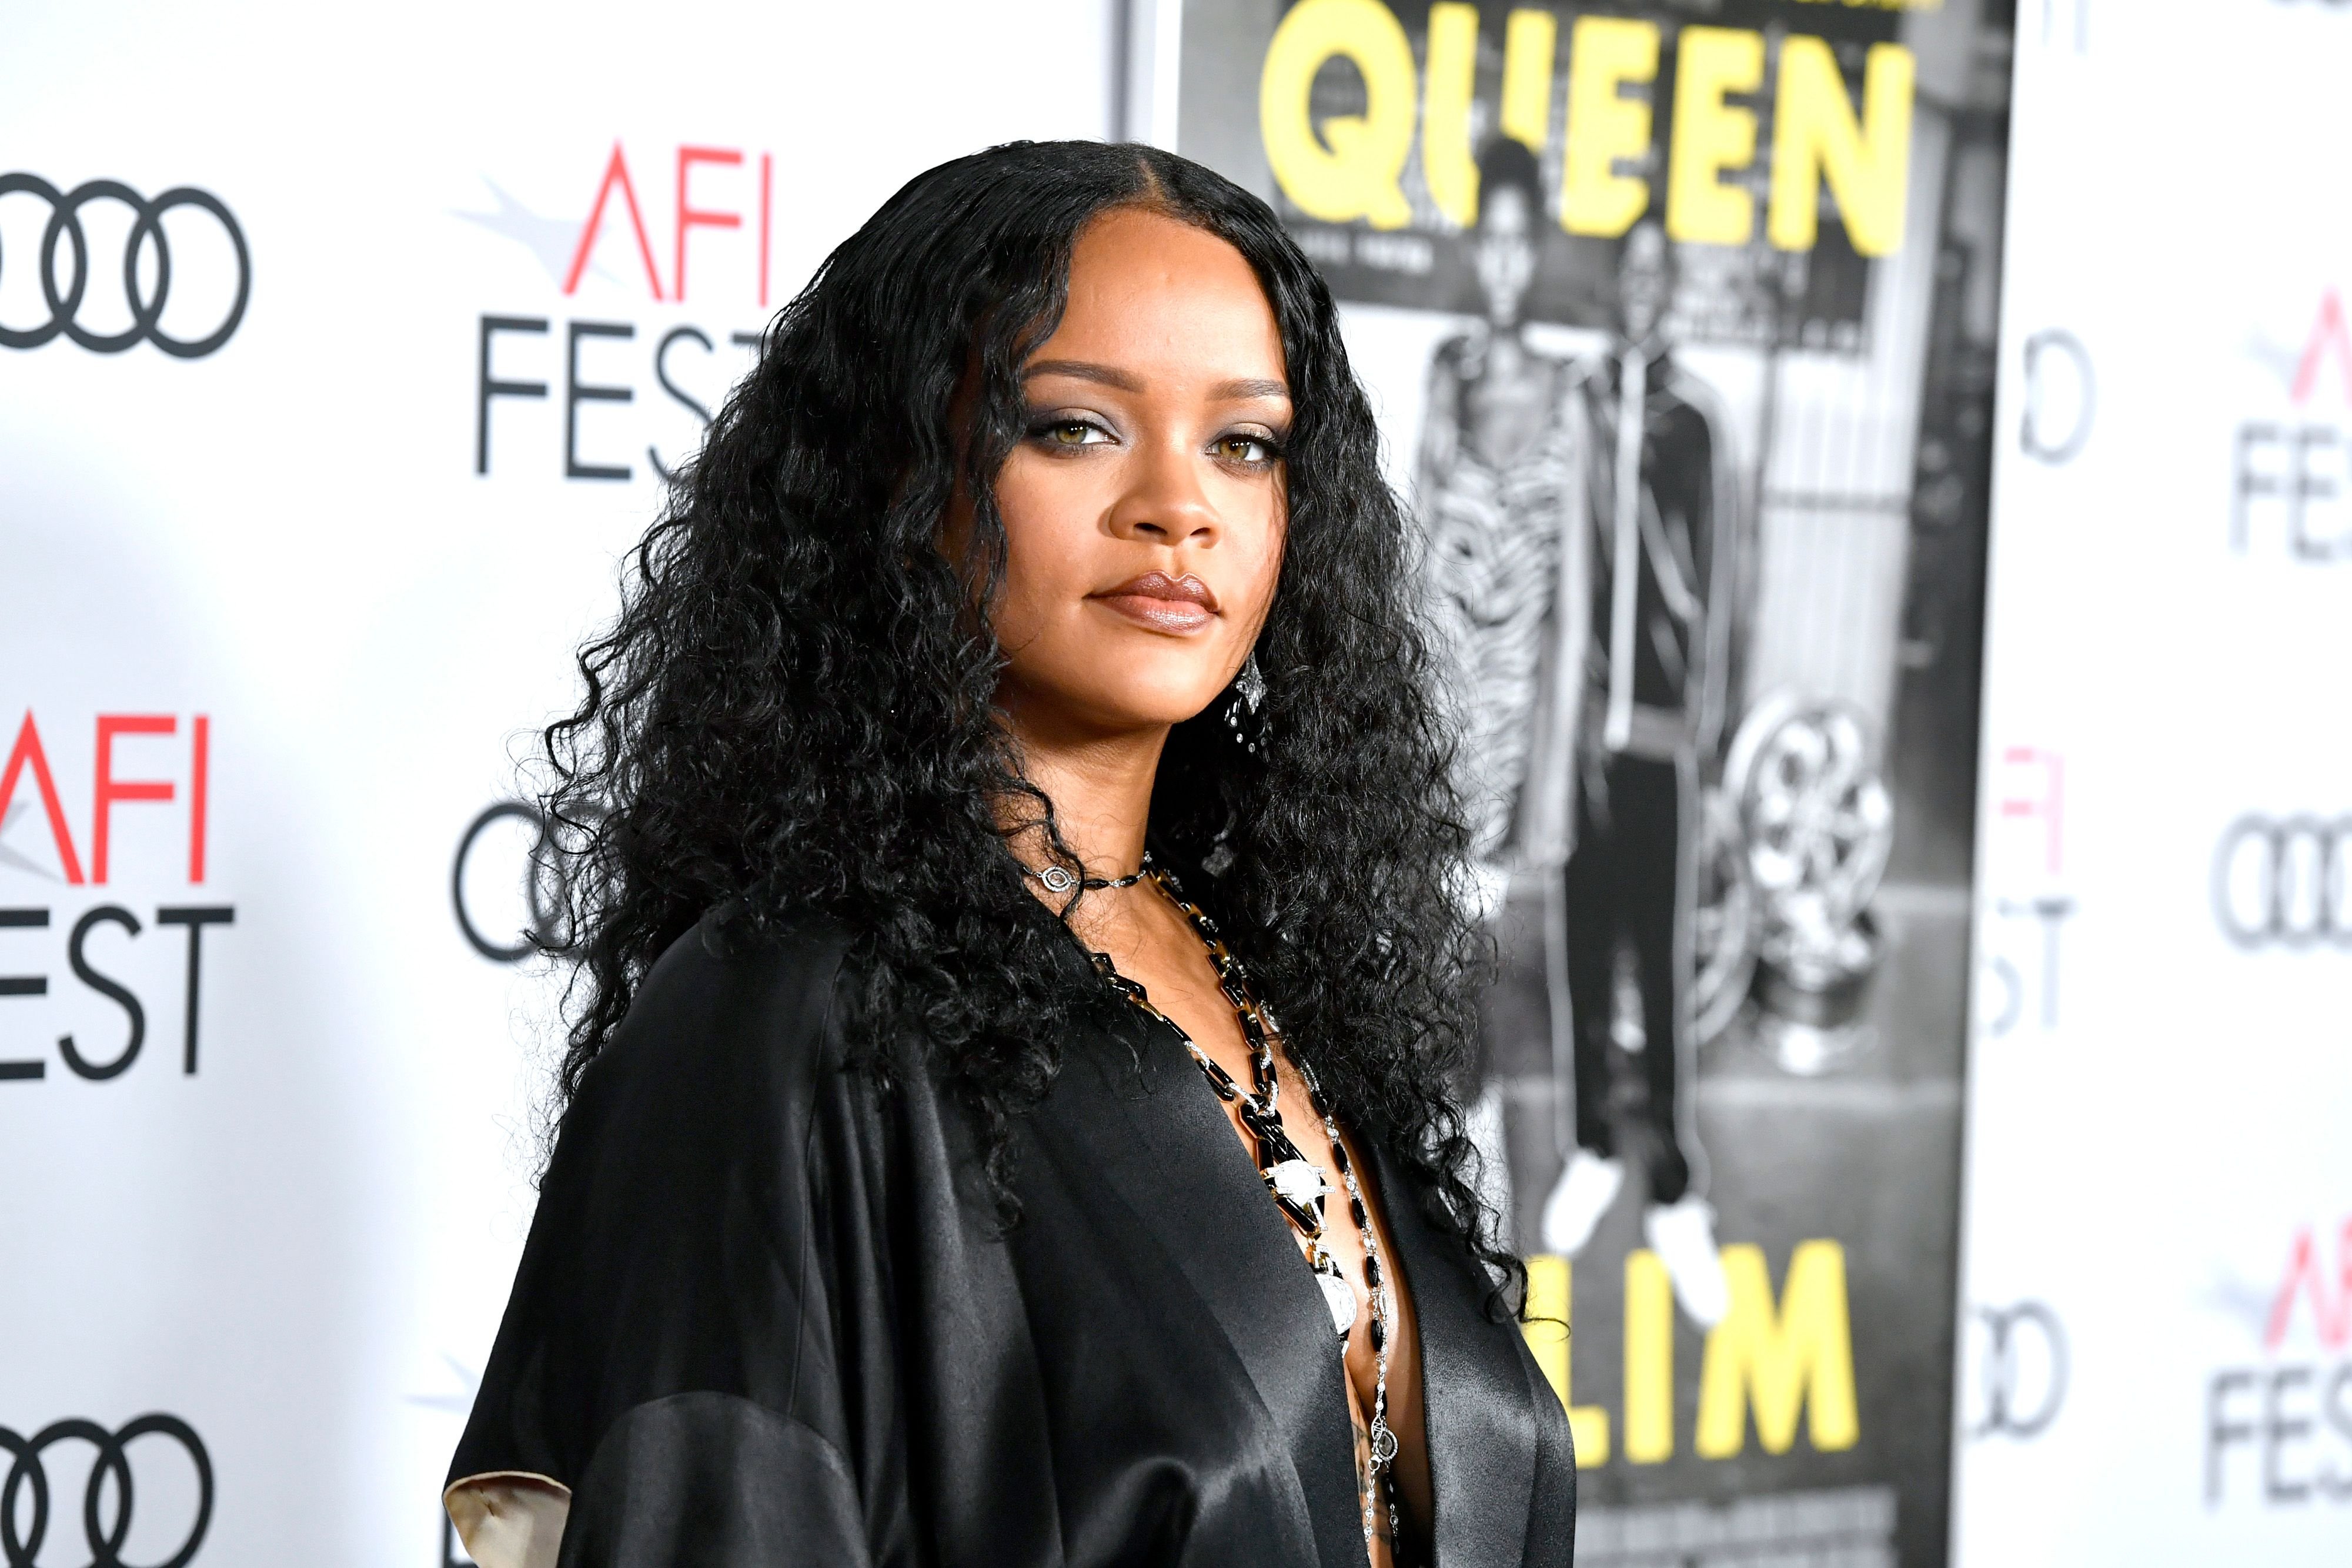 Rihanna at the "Queen & Slim" premiere at AFI FEST 2019 presented by Audi at the TCL Chinese Theatre on November 14, 2019 | Photo: Getty Images